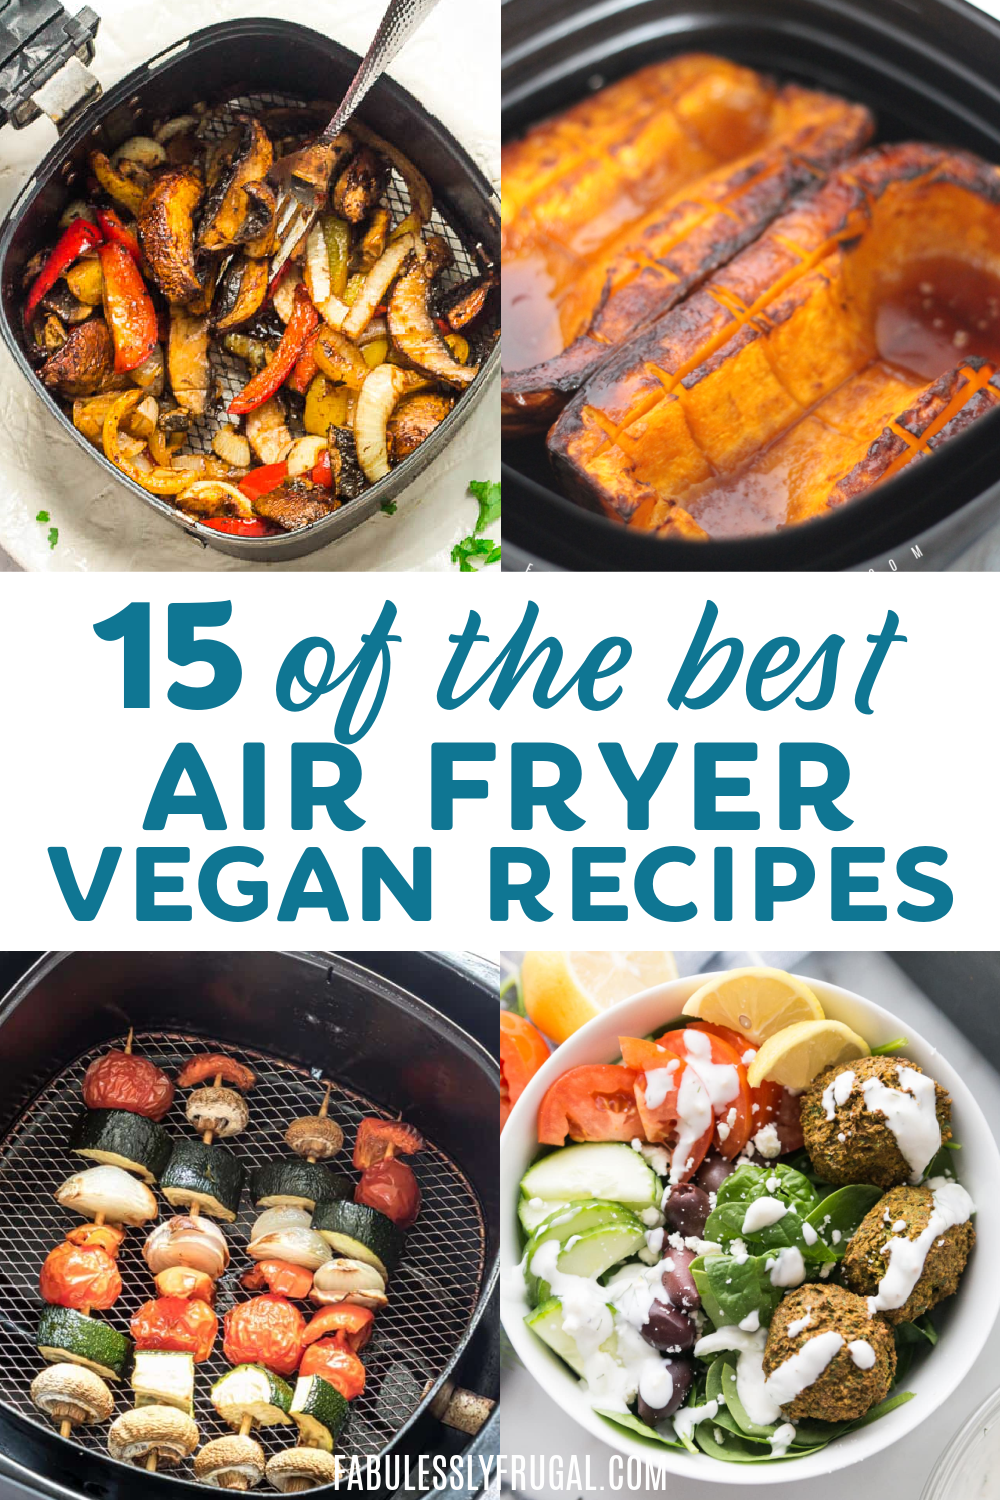 The easiest and most delicious air fryer vegan recipes that you will love